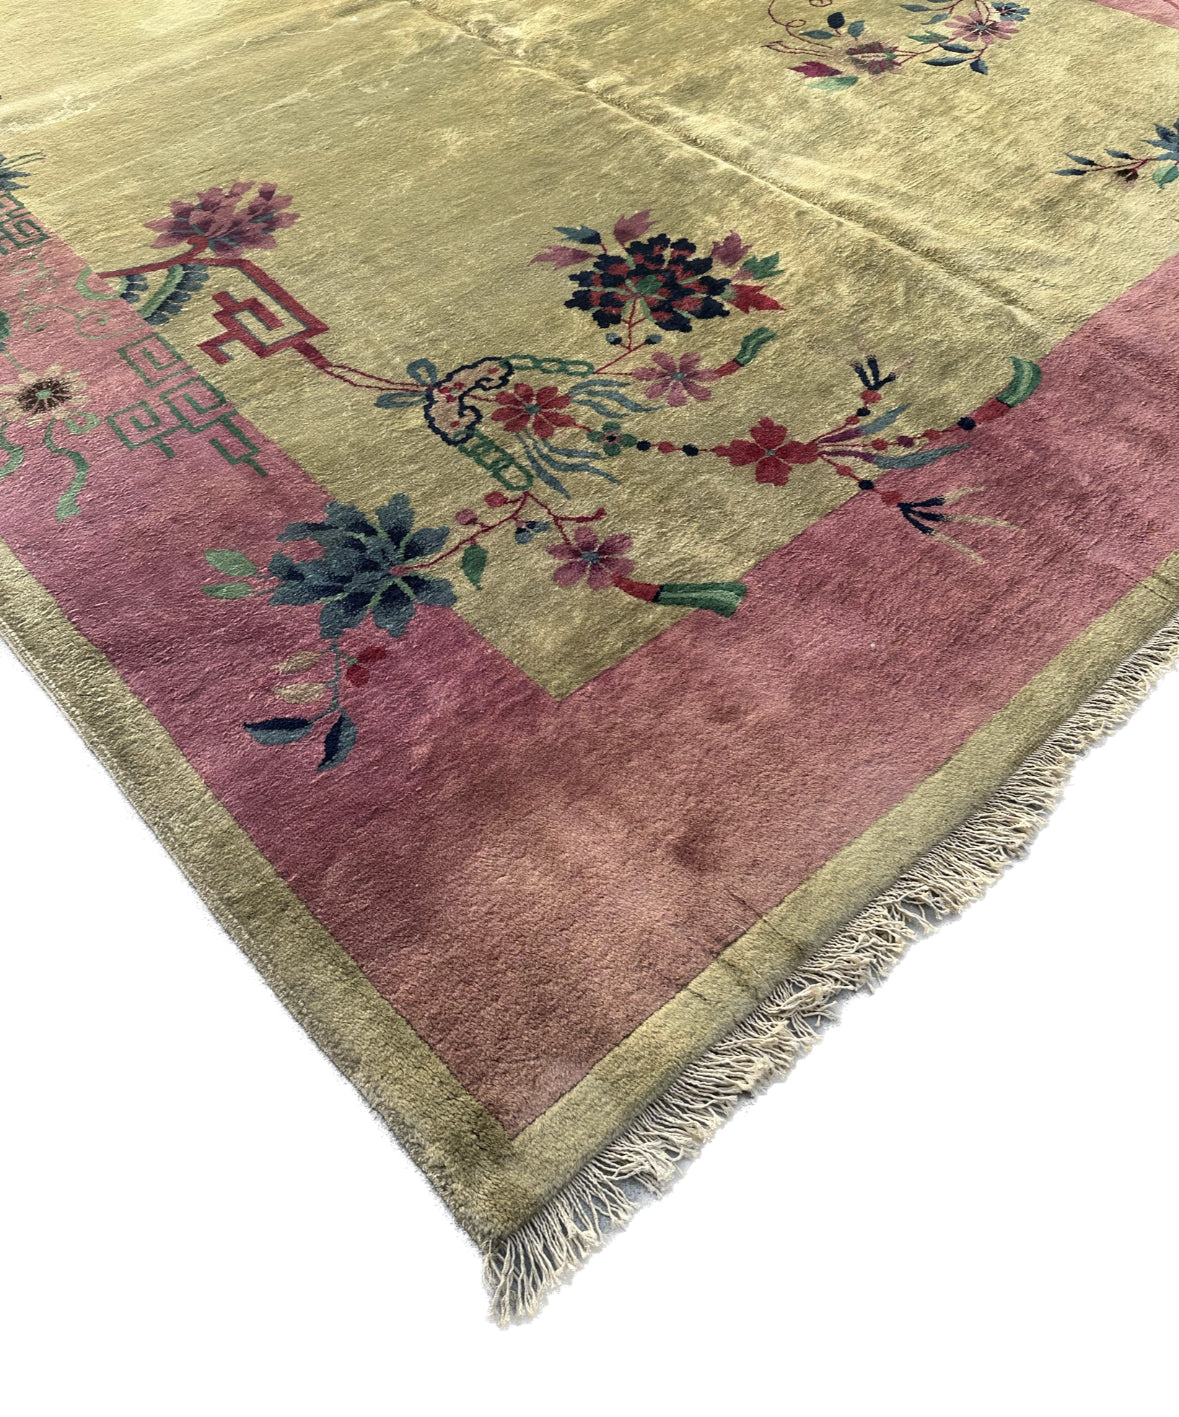 9'x11' Pink and Tan Beige Floral Vintage Chinese Art Deco Rug